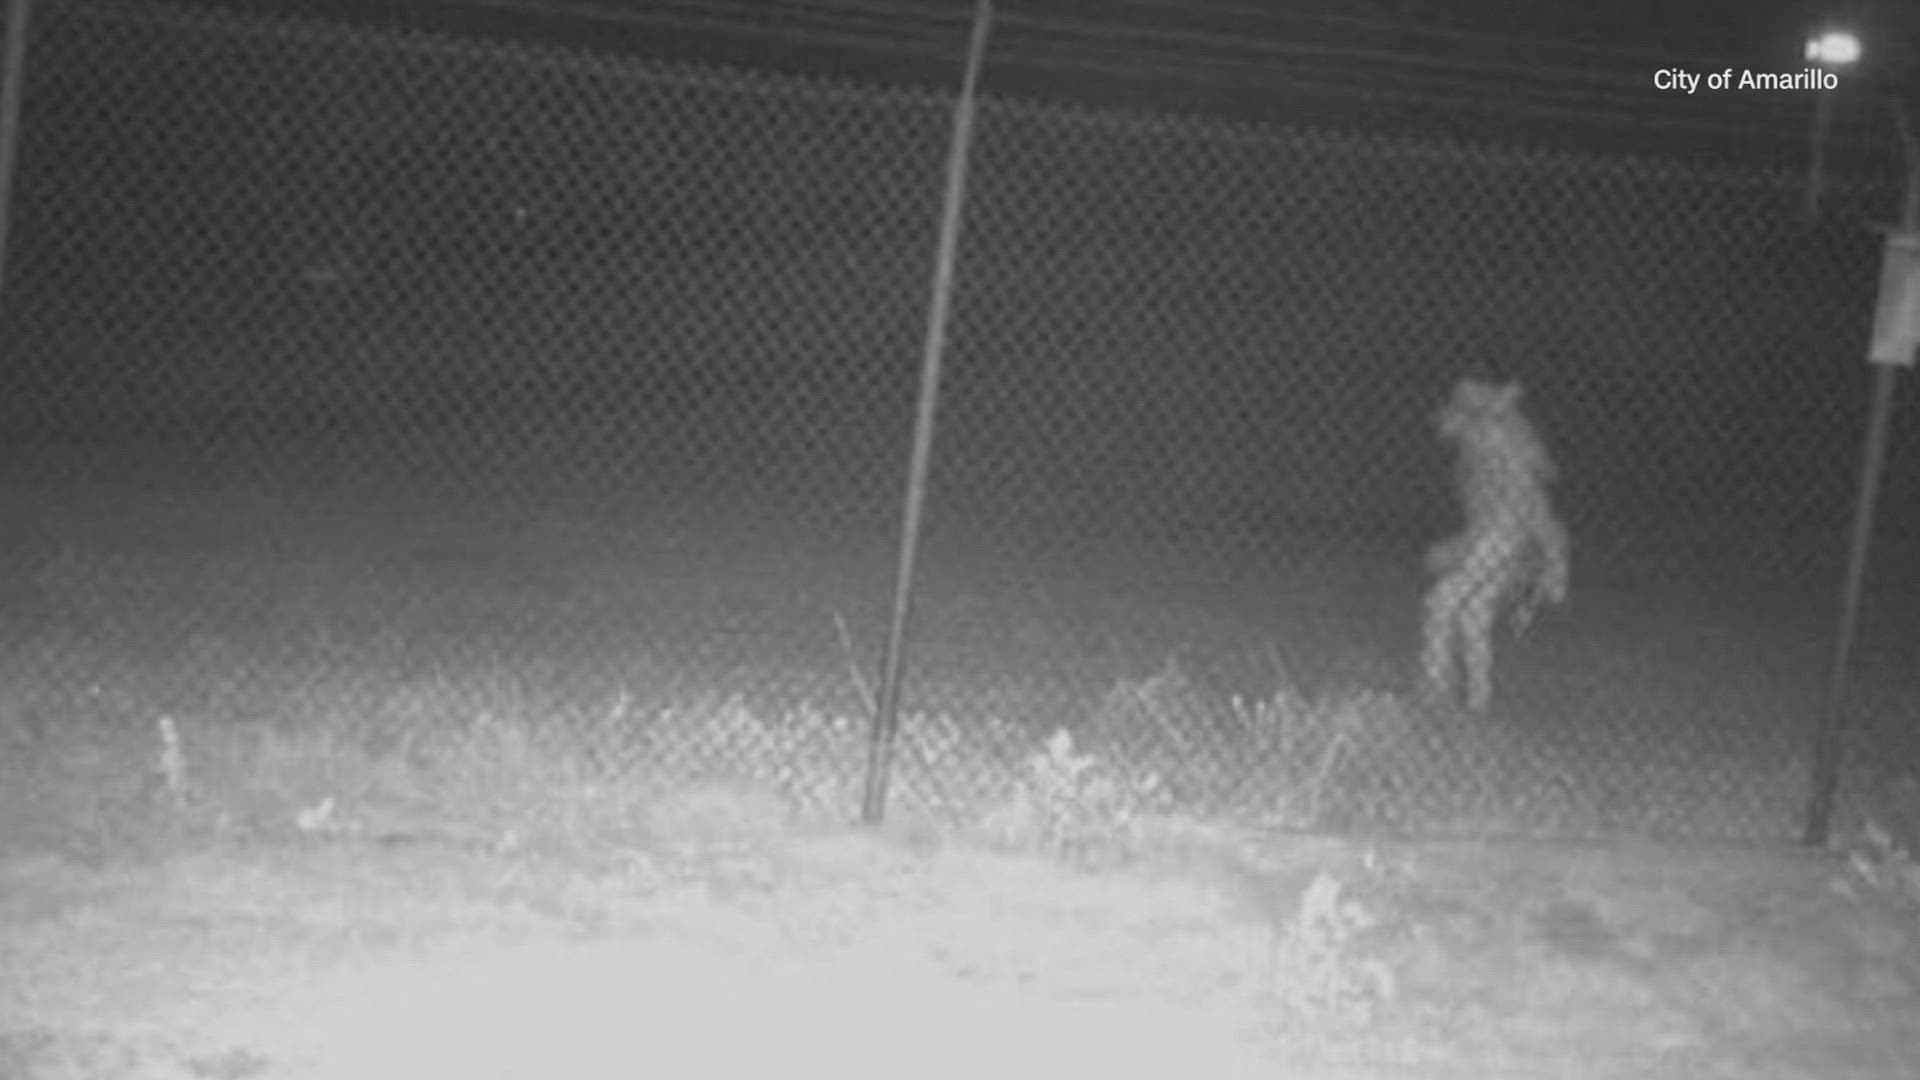 A chupacabra? A person dressed in a costume? Sonic the Hedgehog? The image was captured outside the Amarillo Zoo in the overnight hours of May 21.